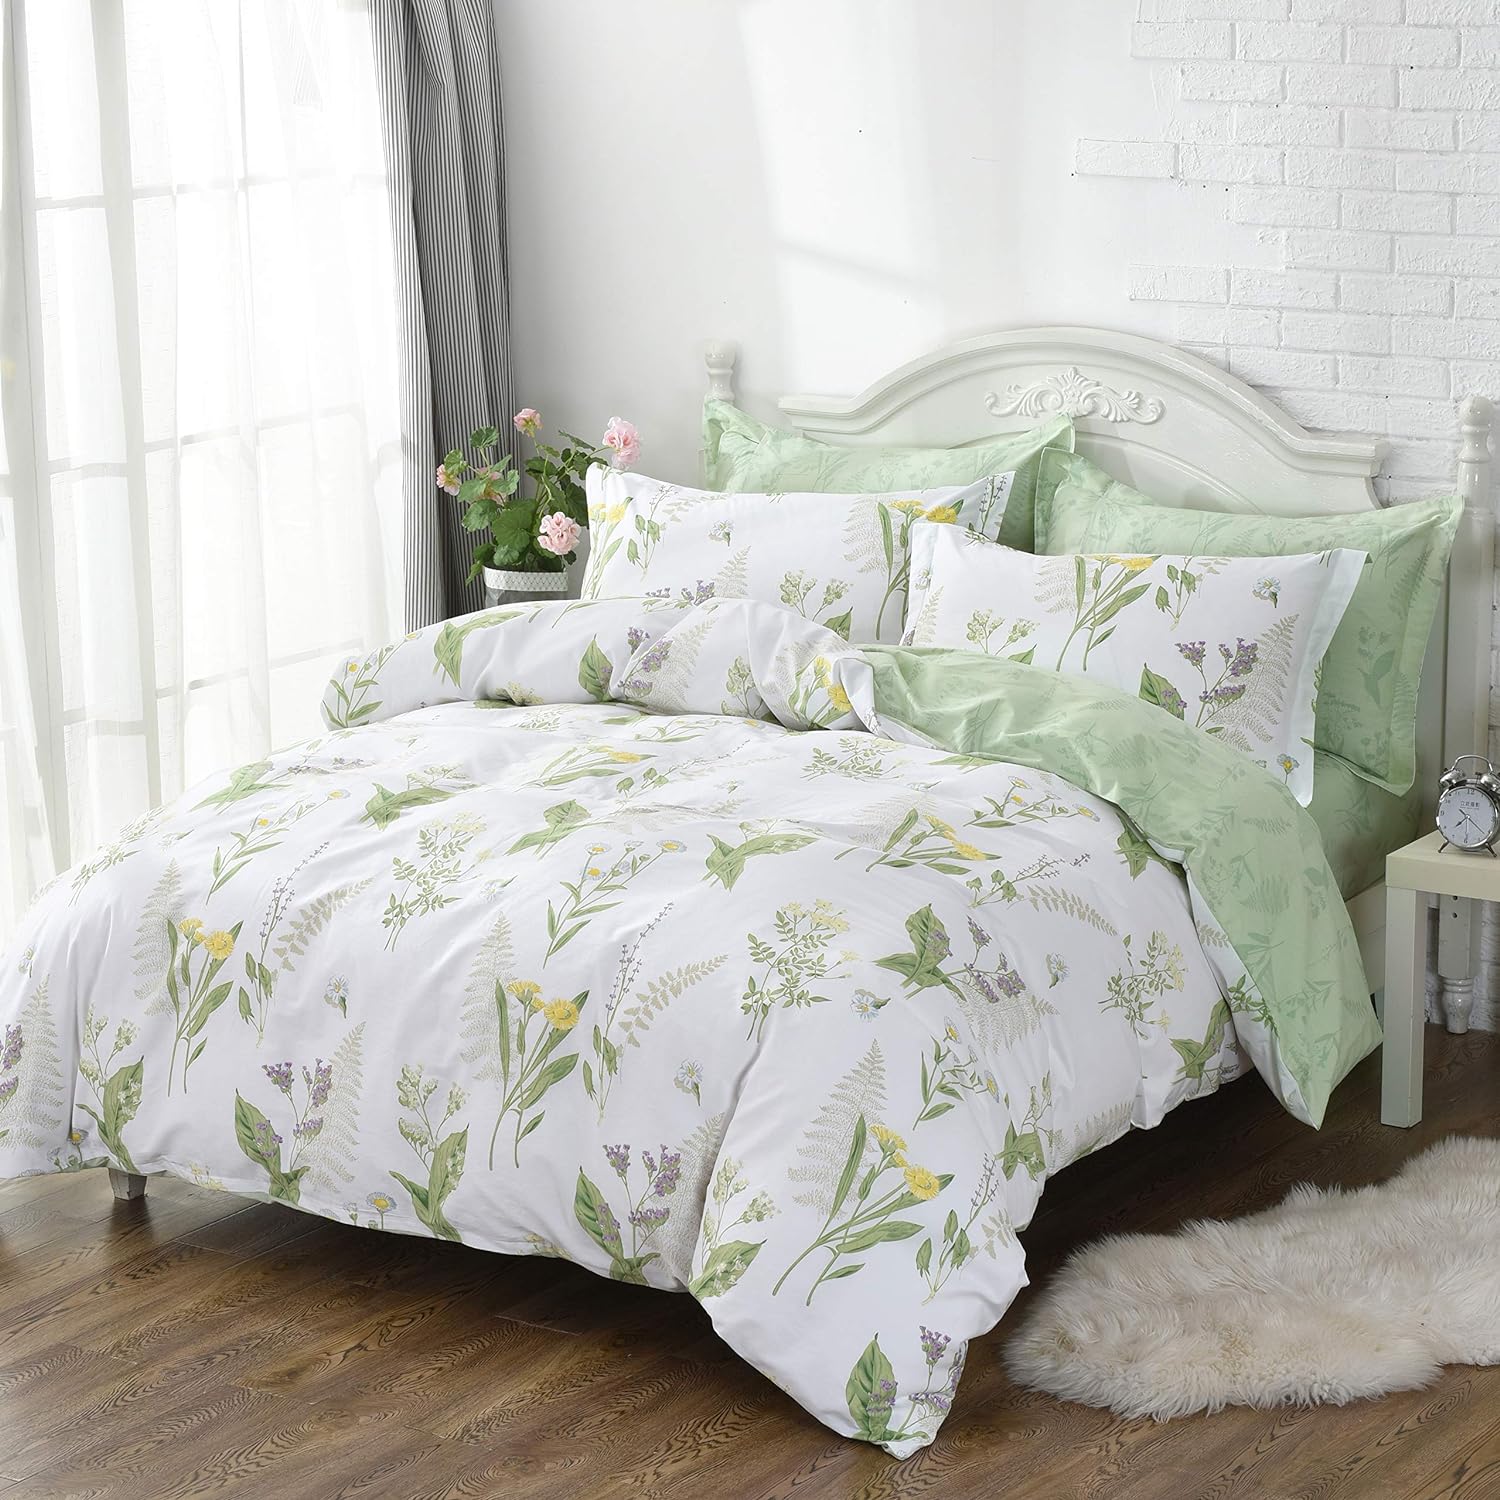 FADFAY Duvet Cover Set Cal King 4-Pcs Shabby Daisy and Lavender Flowers 100% Cotton Hidden Zipper Closure with Green Deep Pocket Fitted Sheet 4 Pieces Cal King Size